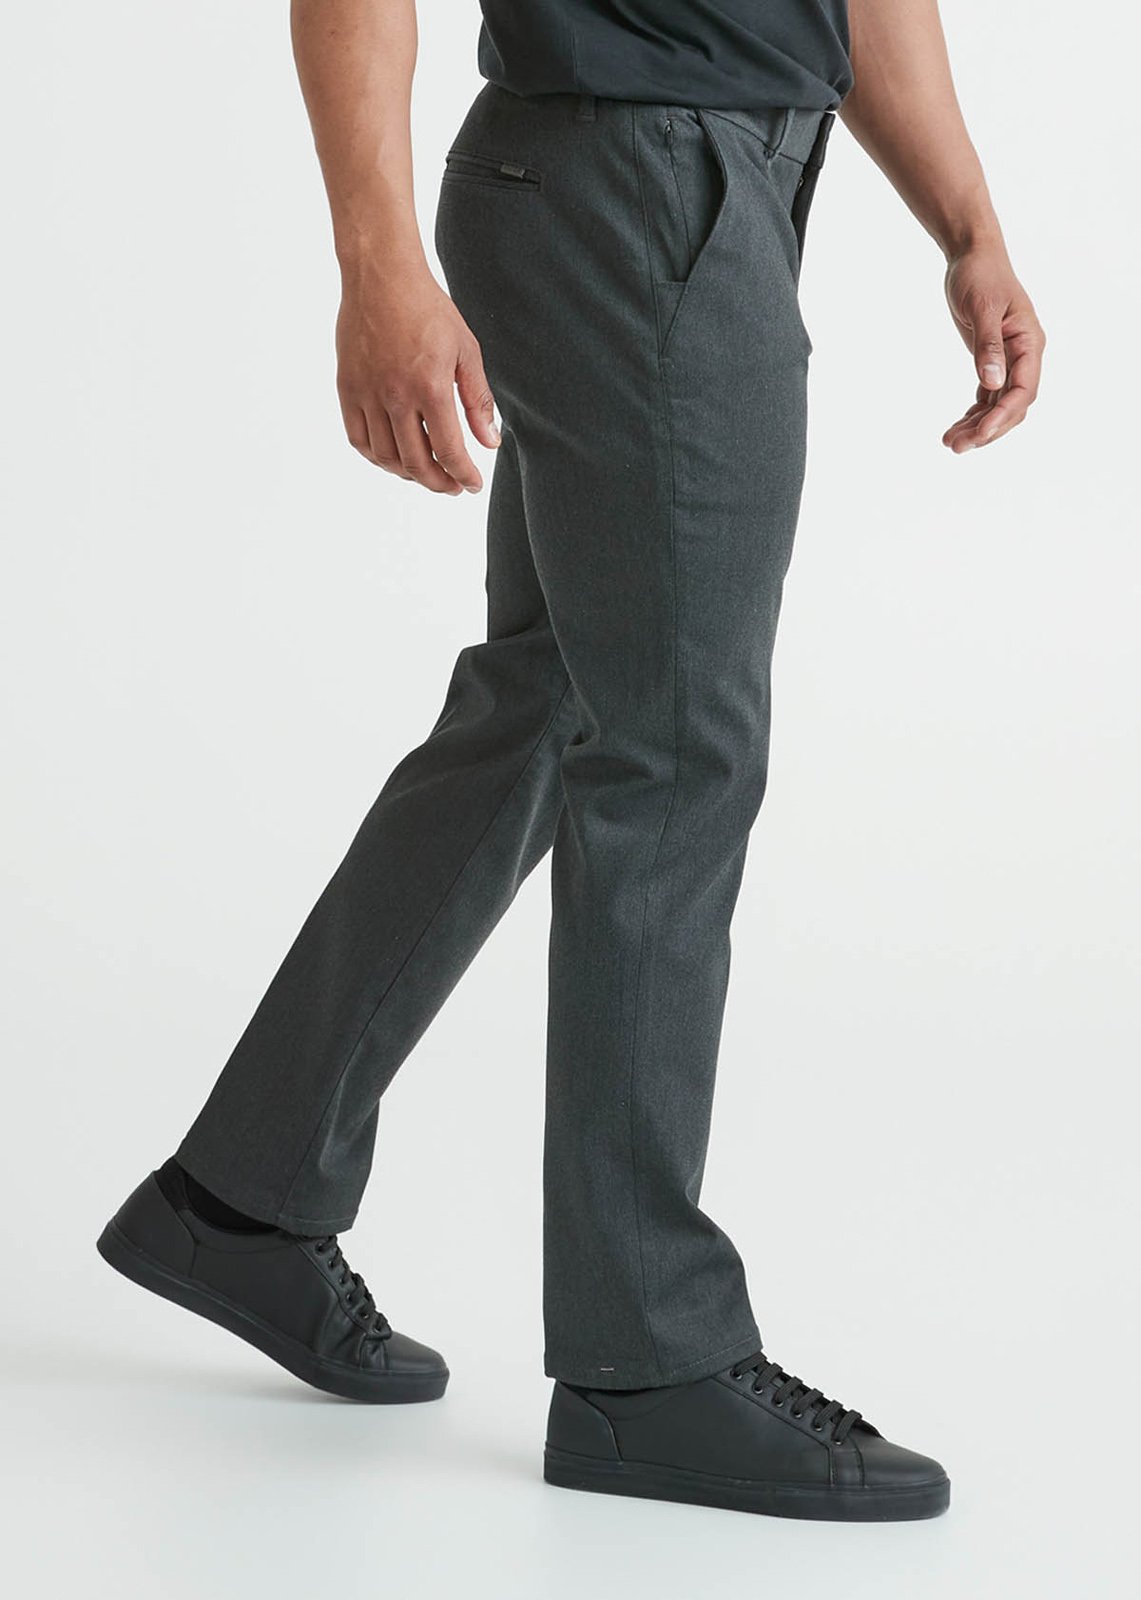 Byford Men Leisure Sport Slim Fit Solid Charcoal Trousers - Selling Fast at  Pantaloons.com